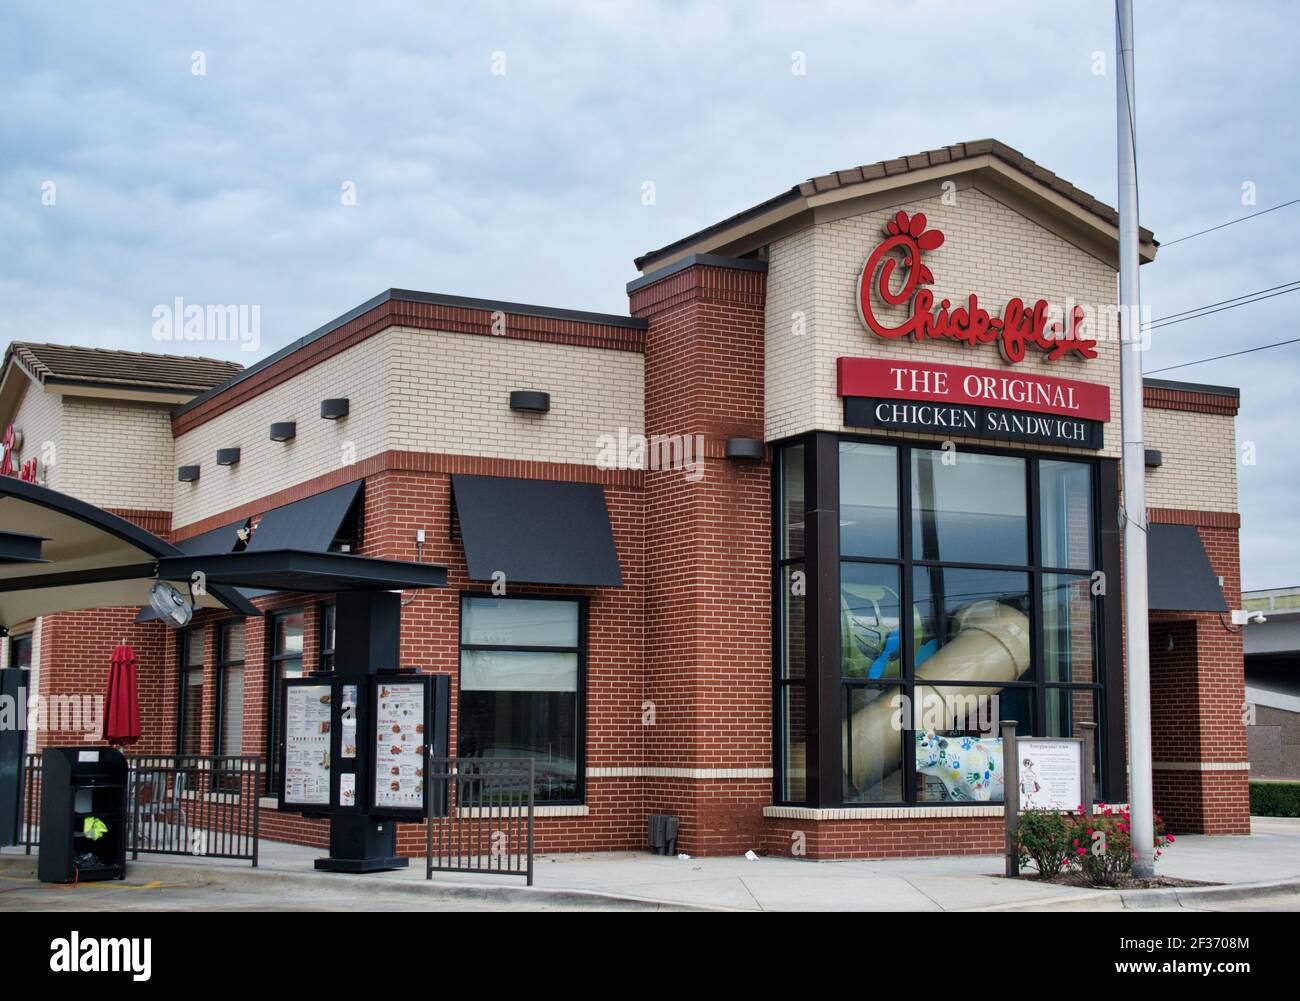 Humble, Texas USA 11-28-2019: Chick-Fil-A Fast-Food-Kette in Humble, TX. Stockfoto